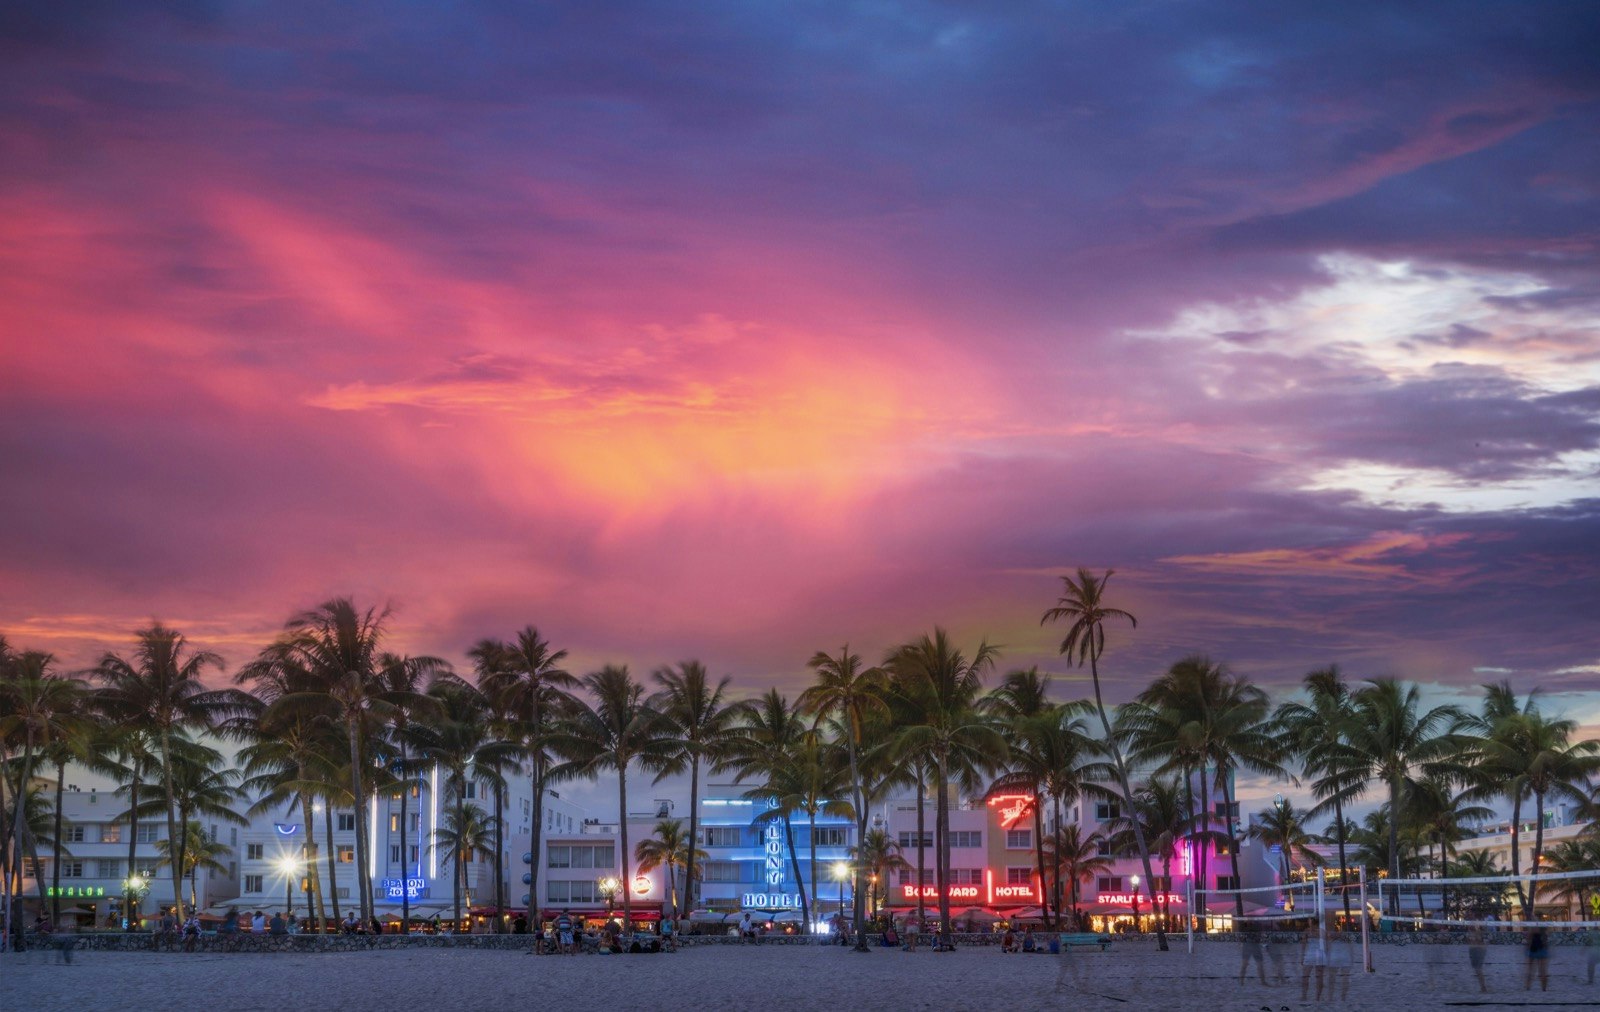 The strip in Miami with neon lit buildings, palm trees and a pink sky behind